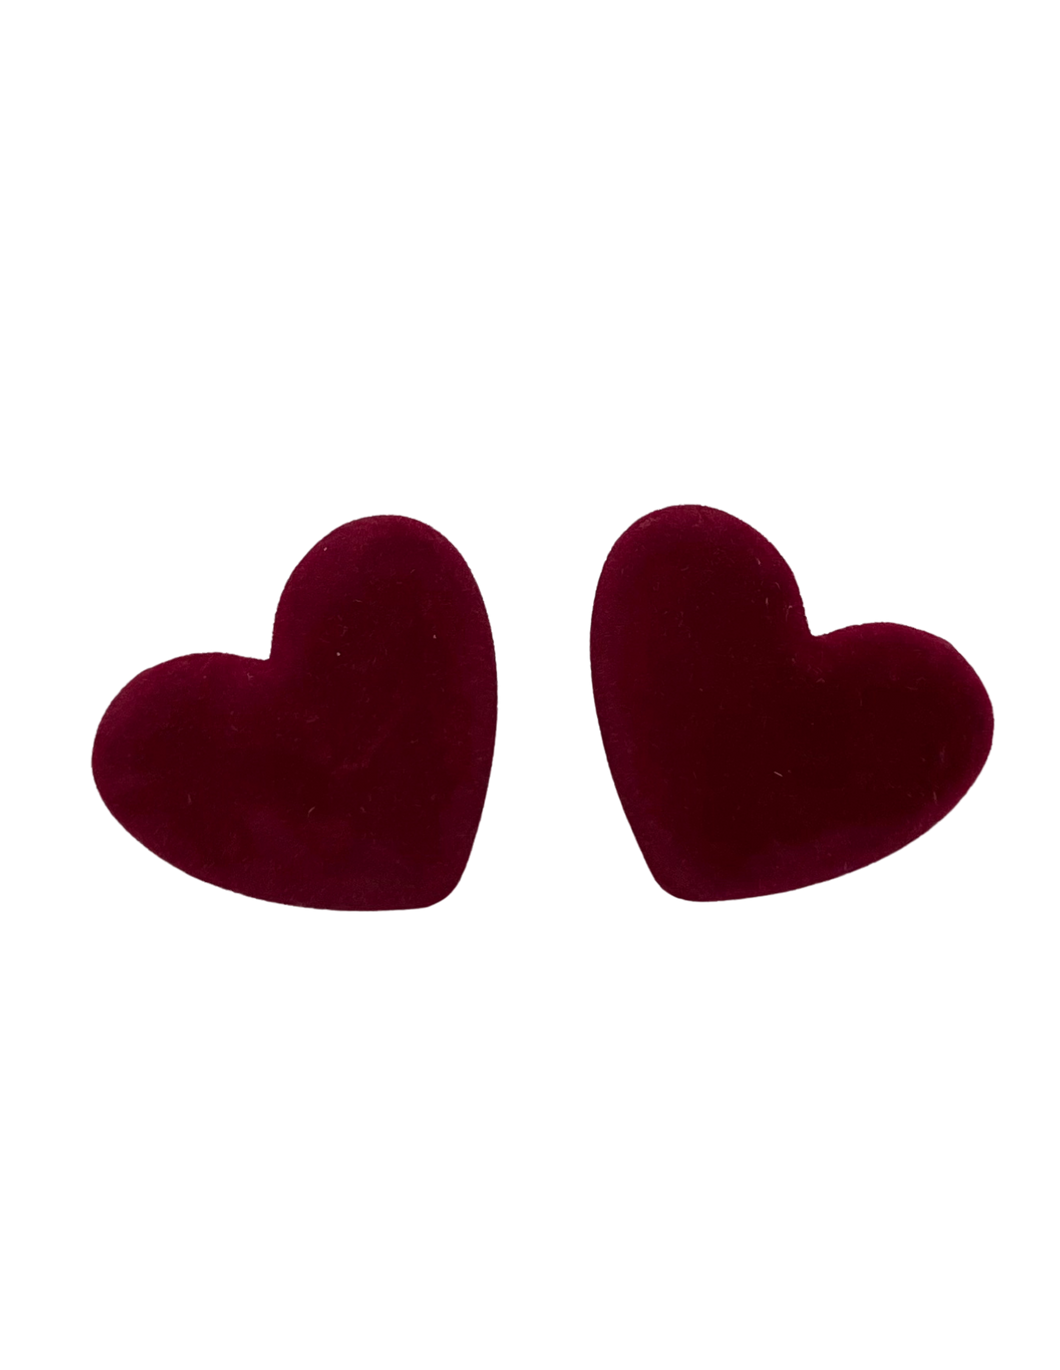 Hair Clip- Fuzzy Red Hearts - CovetedThings